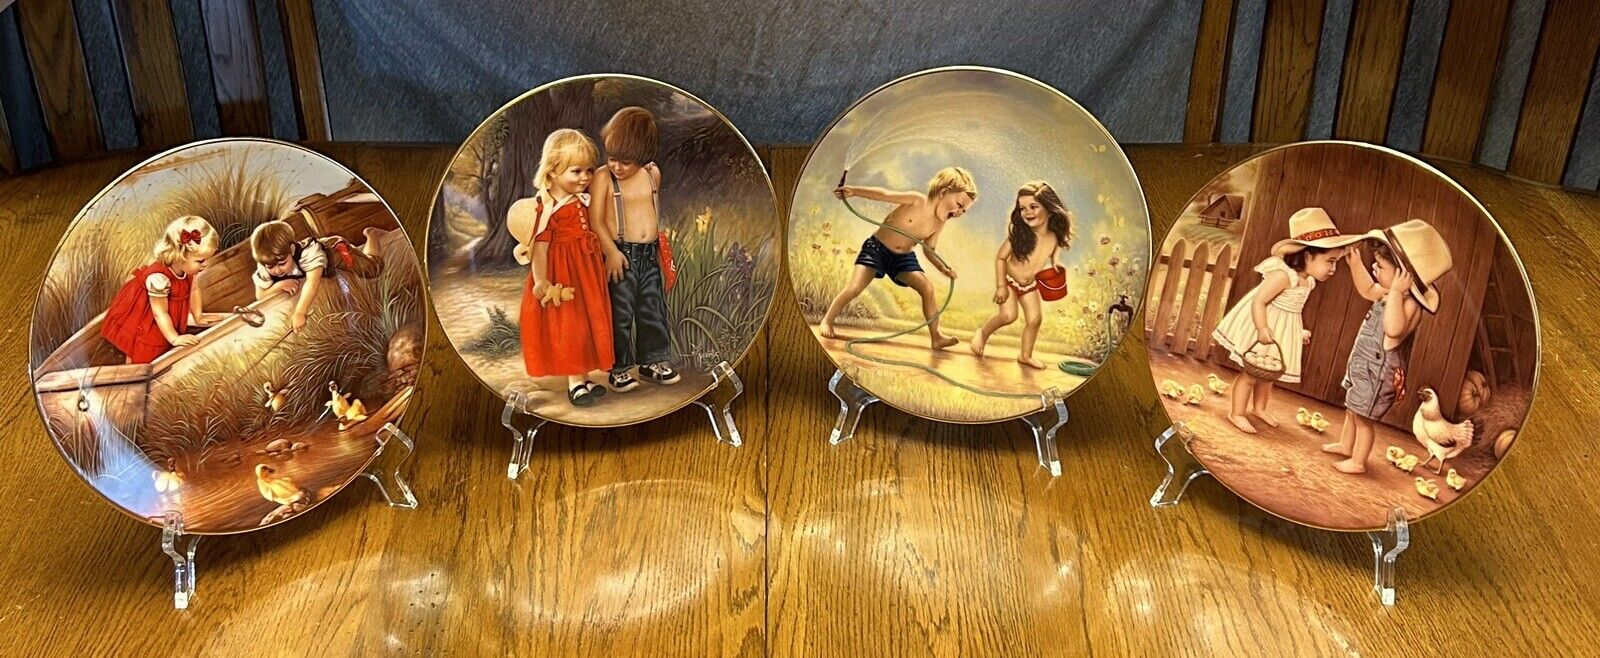 Armstrong’s Reflections of Innocence Children Porcelain Plates Set of 4-1985